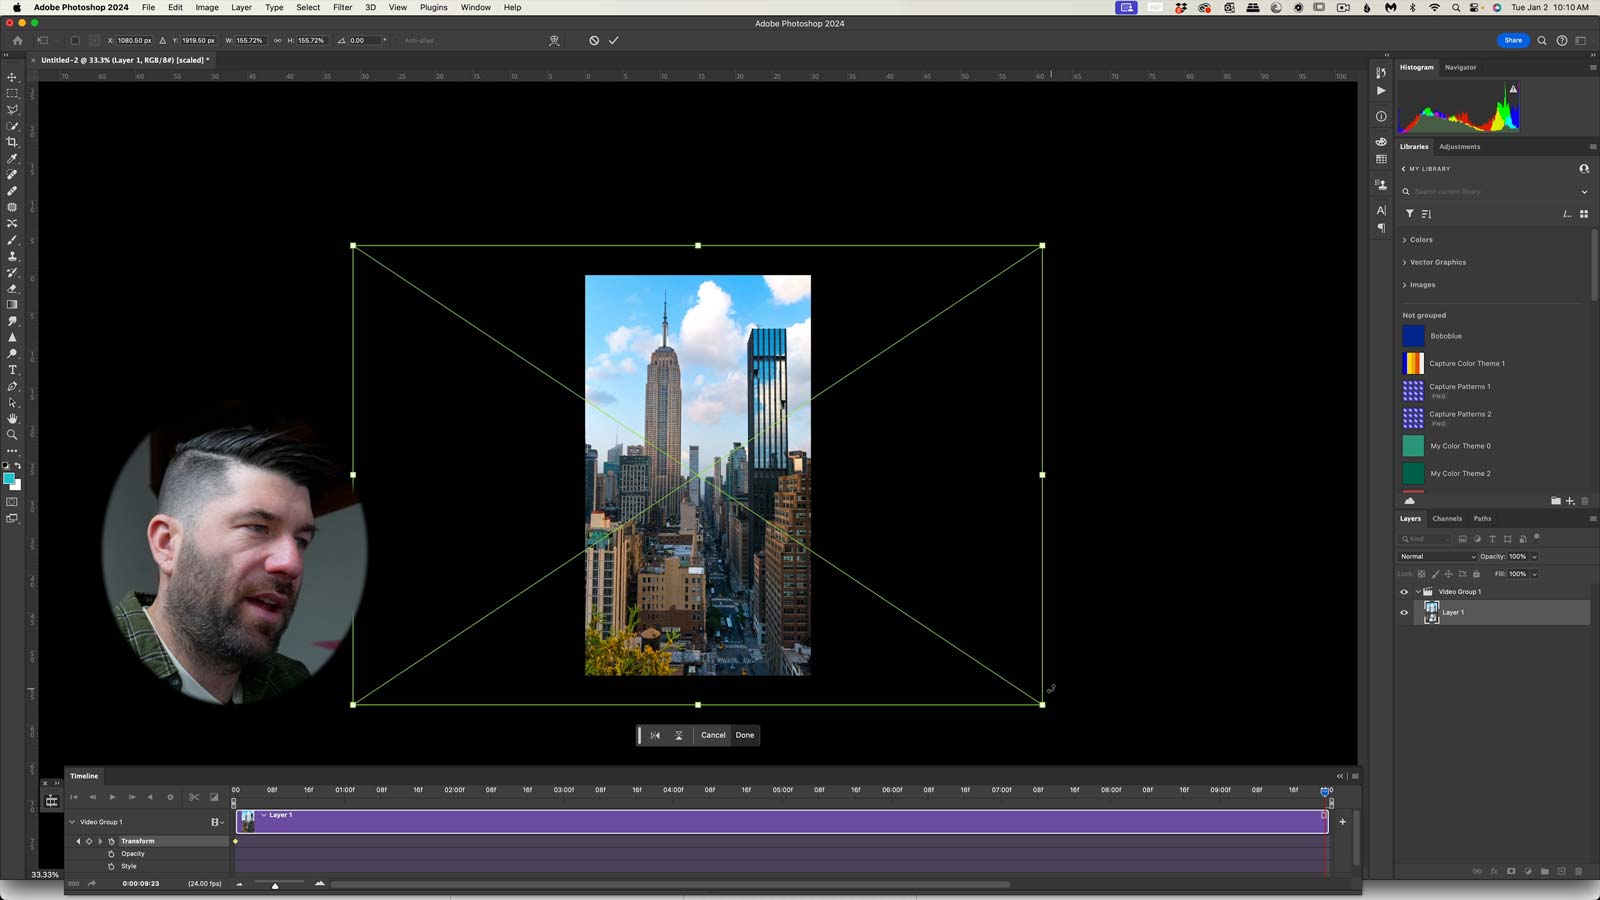 Showing-how-to-animate-a-time-lapse-in-photoshop-using-keyframes